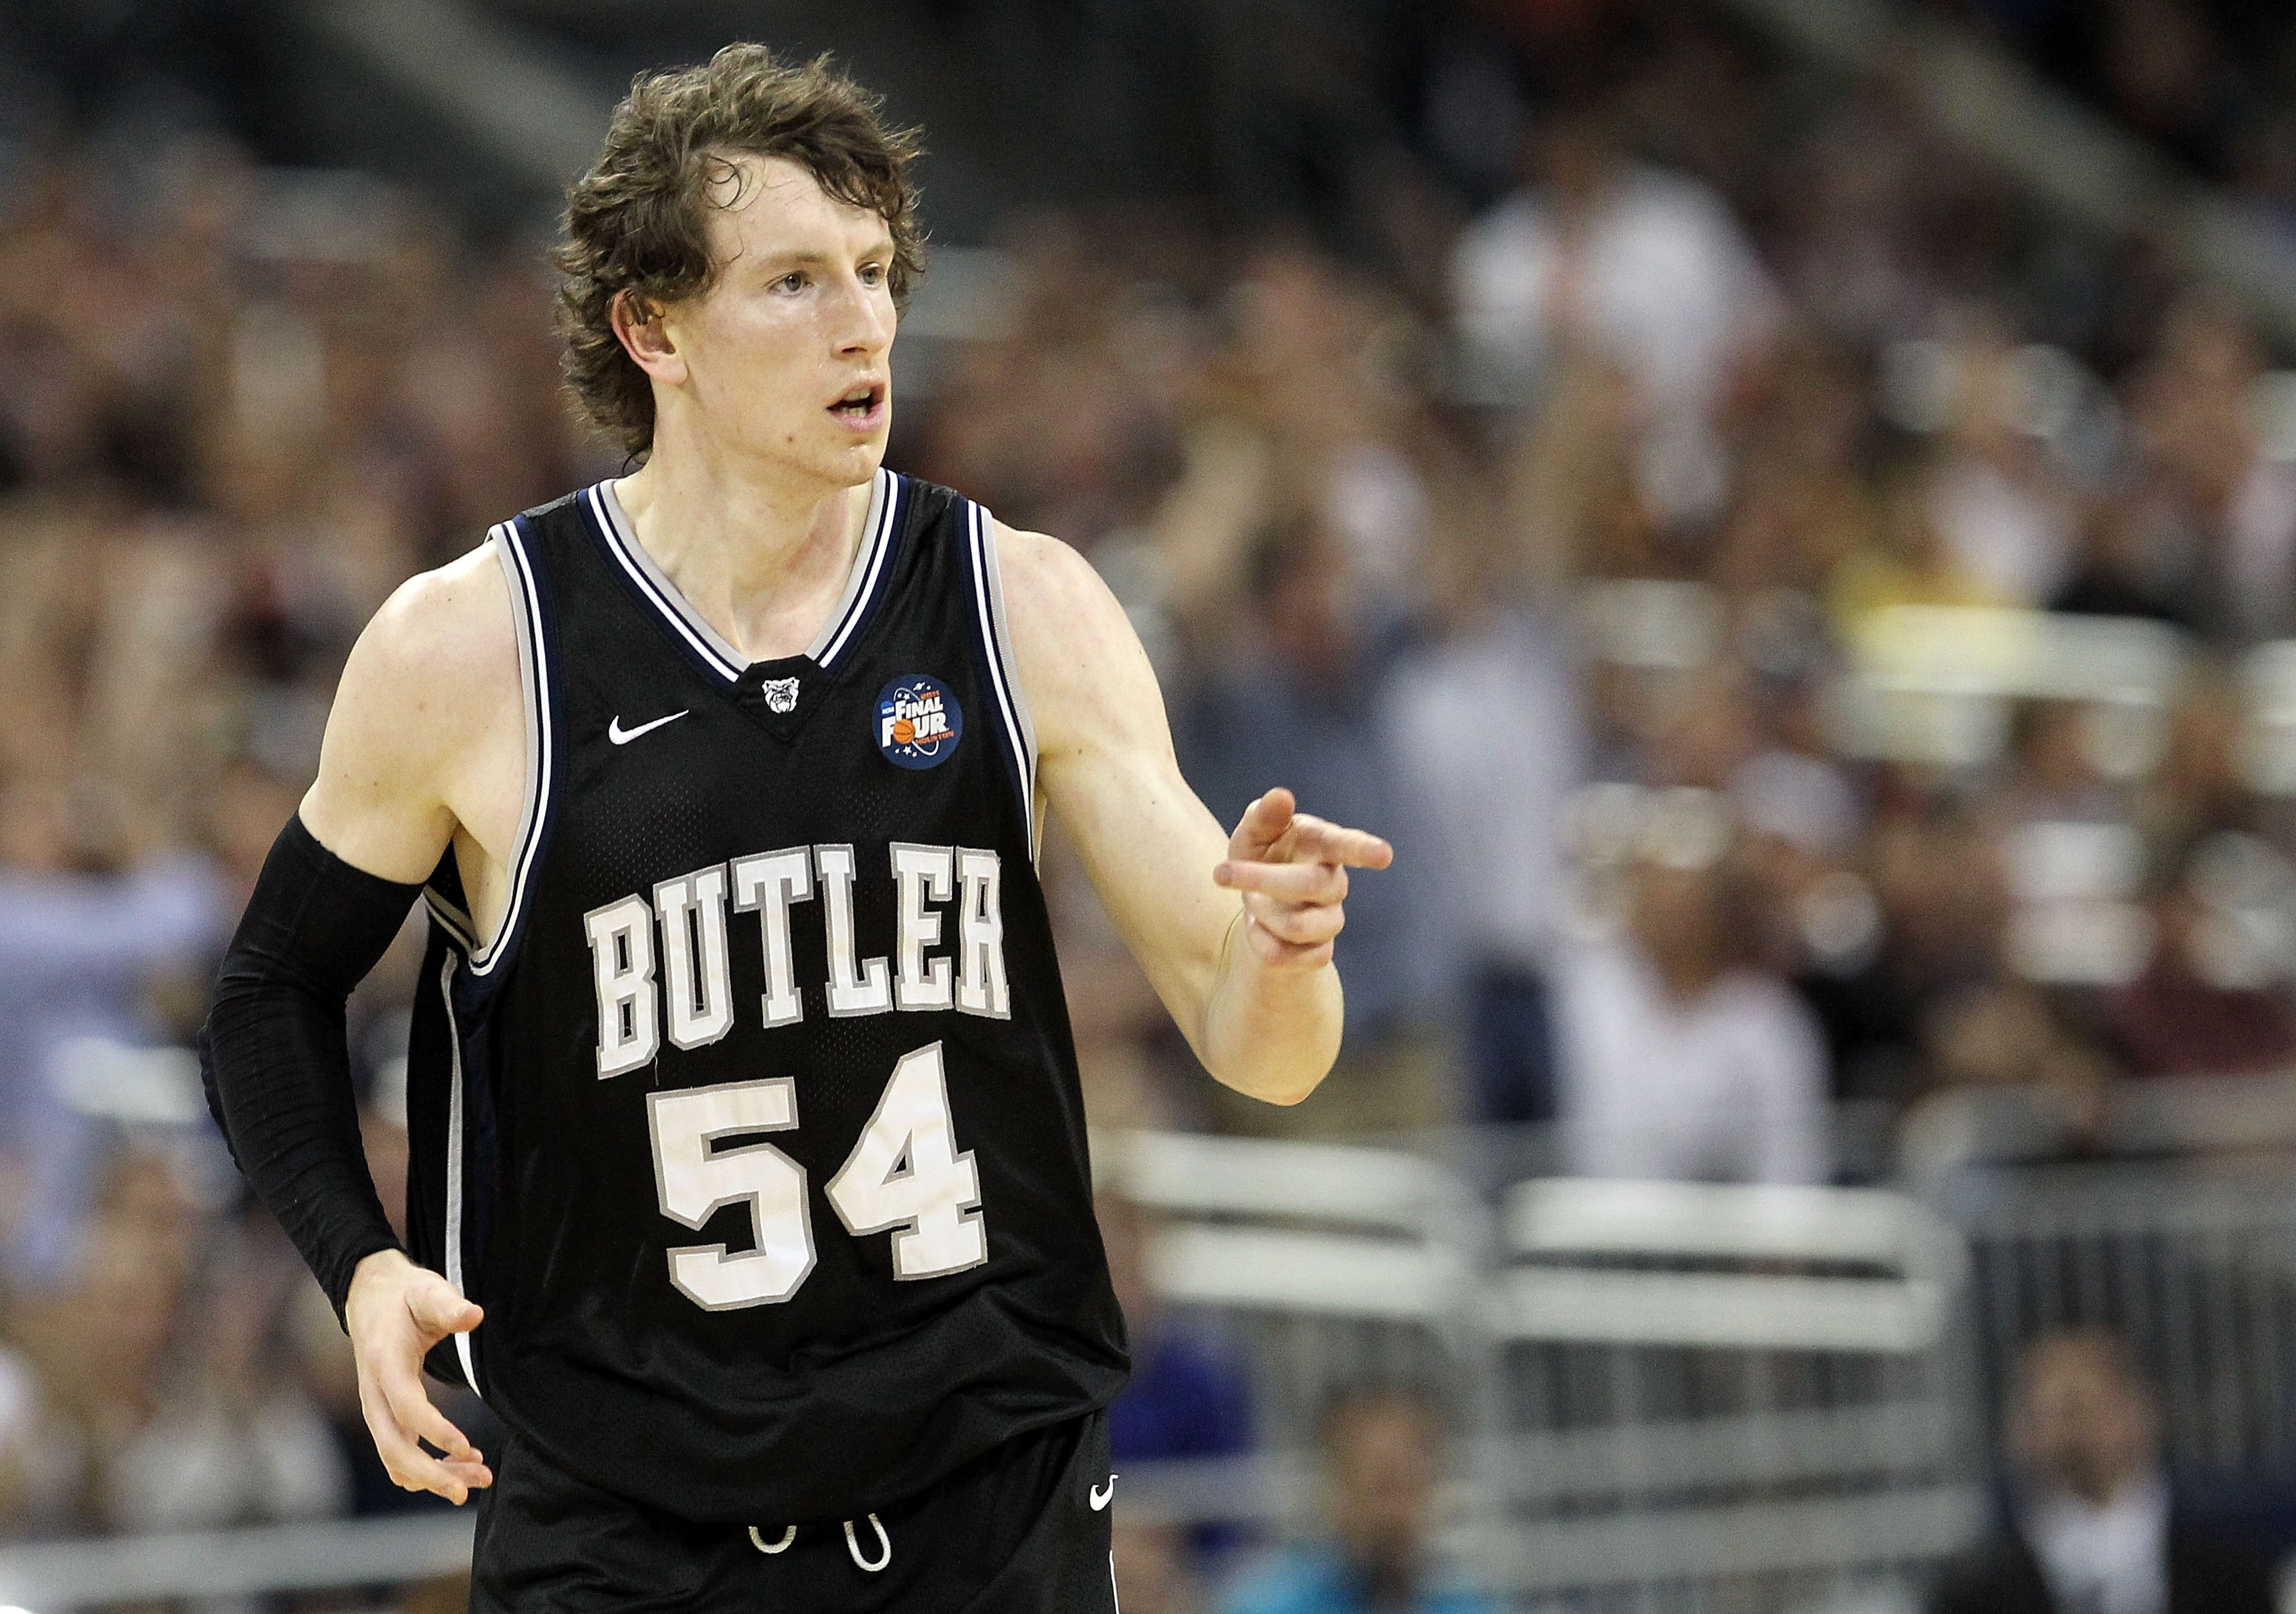 HOUSTON, TX - APRIL 04:  Matt Howard #54 of the Butler Bulldogs reacts after a play against the Connecticut Huskies during the National Championship Game of the 2011 NCAA Division I Men's Basketball Tournament at Reliant Stadium on April 4, 2011 in Housto